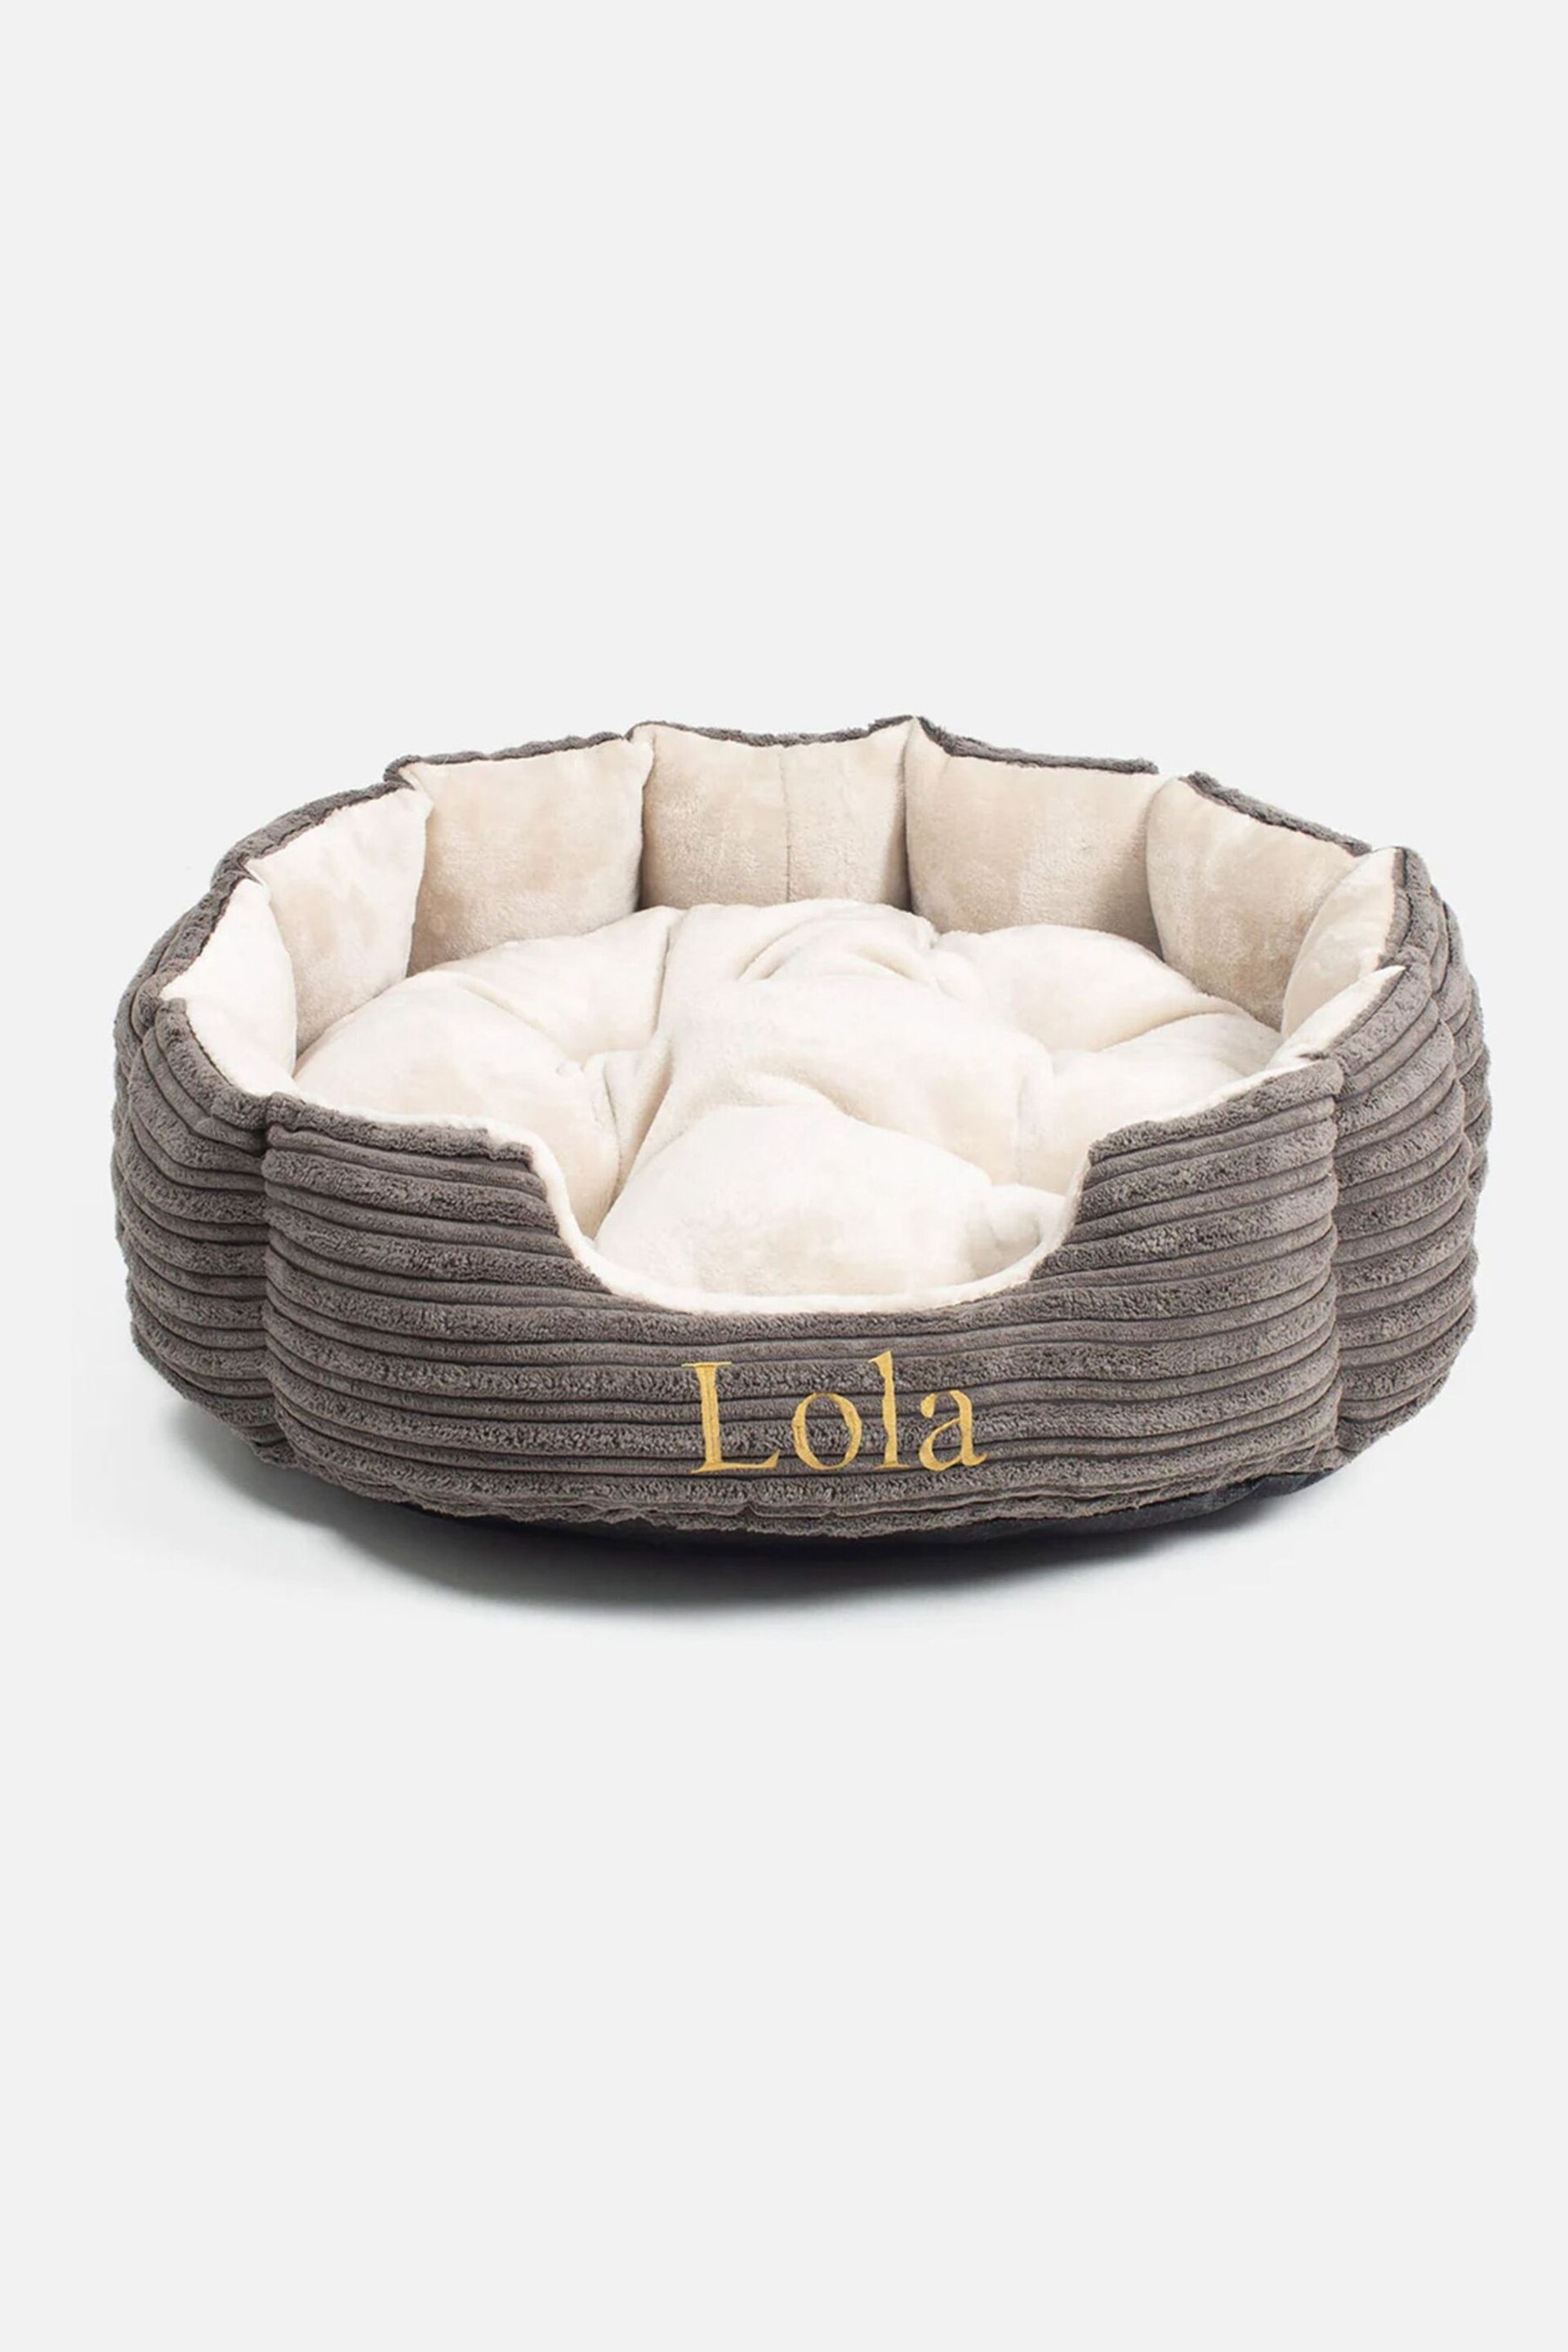 Lords and Labradors Dark Grey Essentials Round Dog Bed - Image 3 of 3